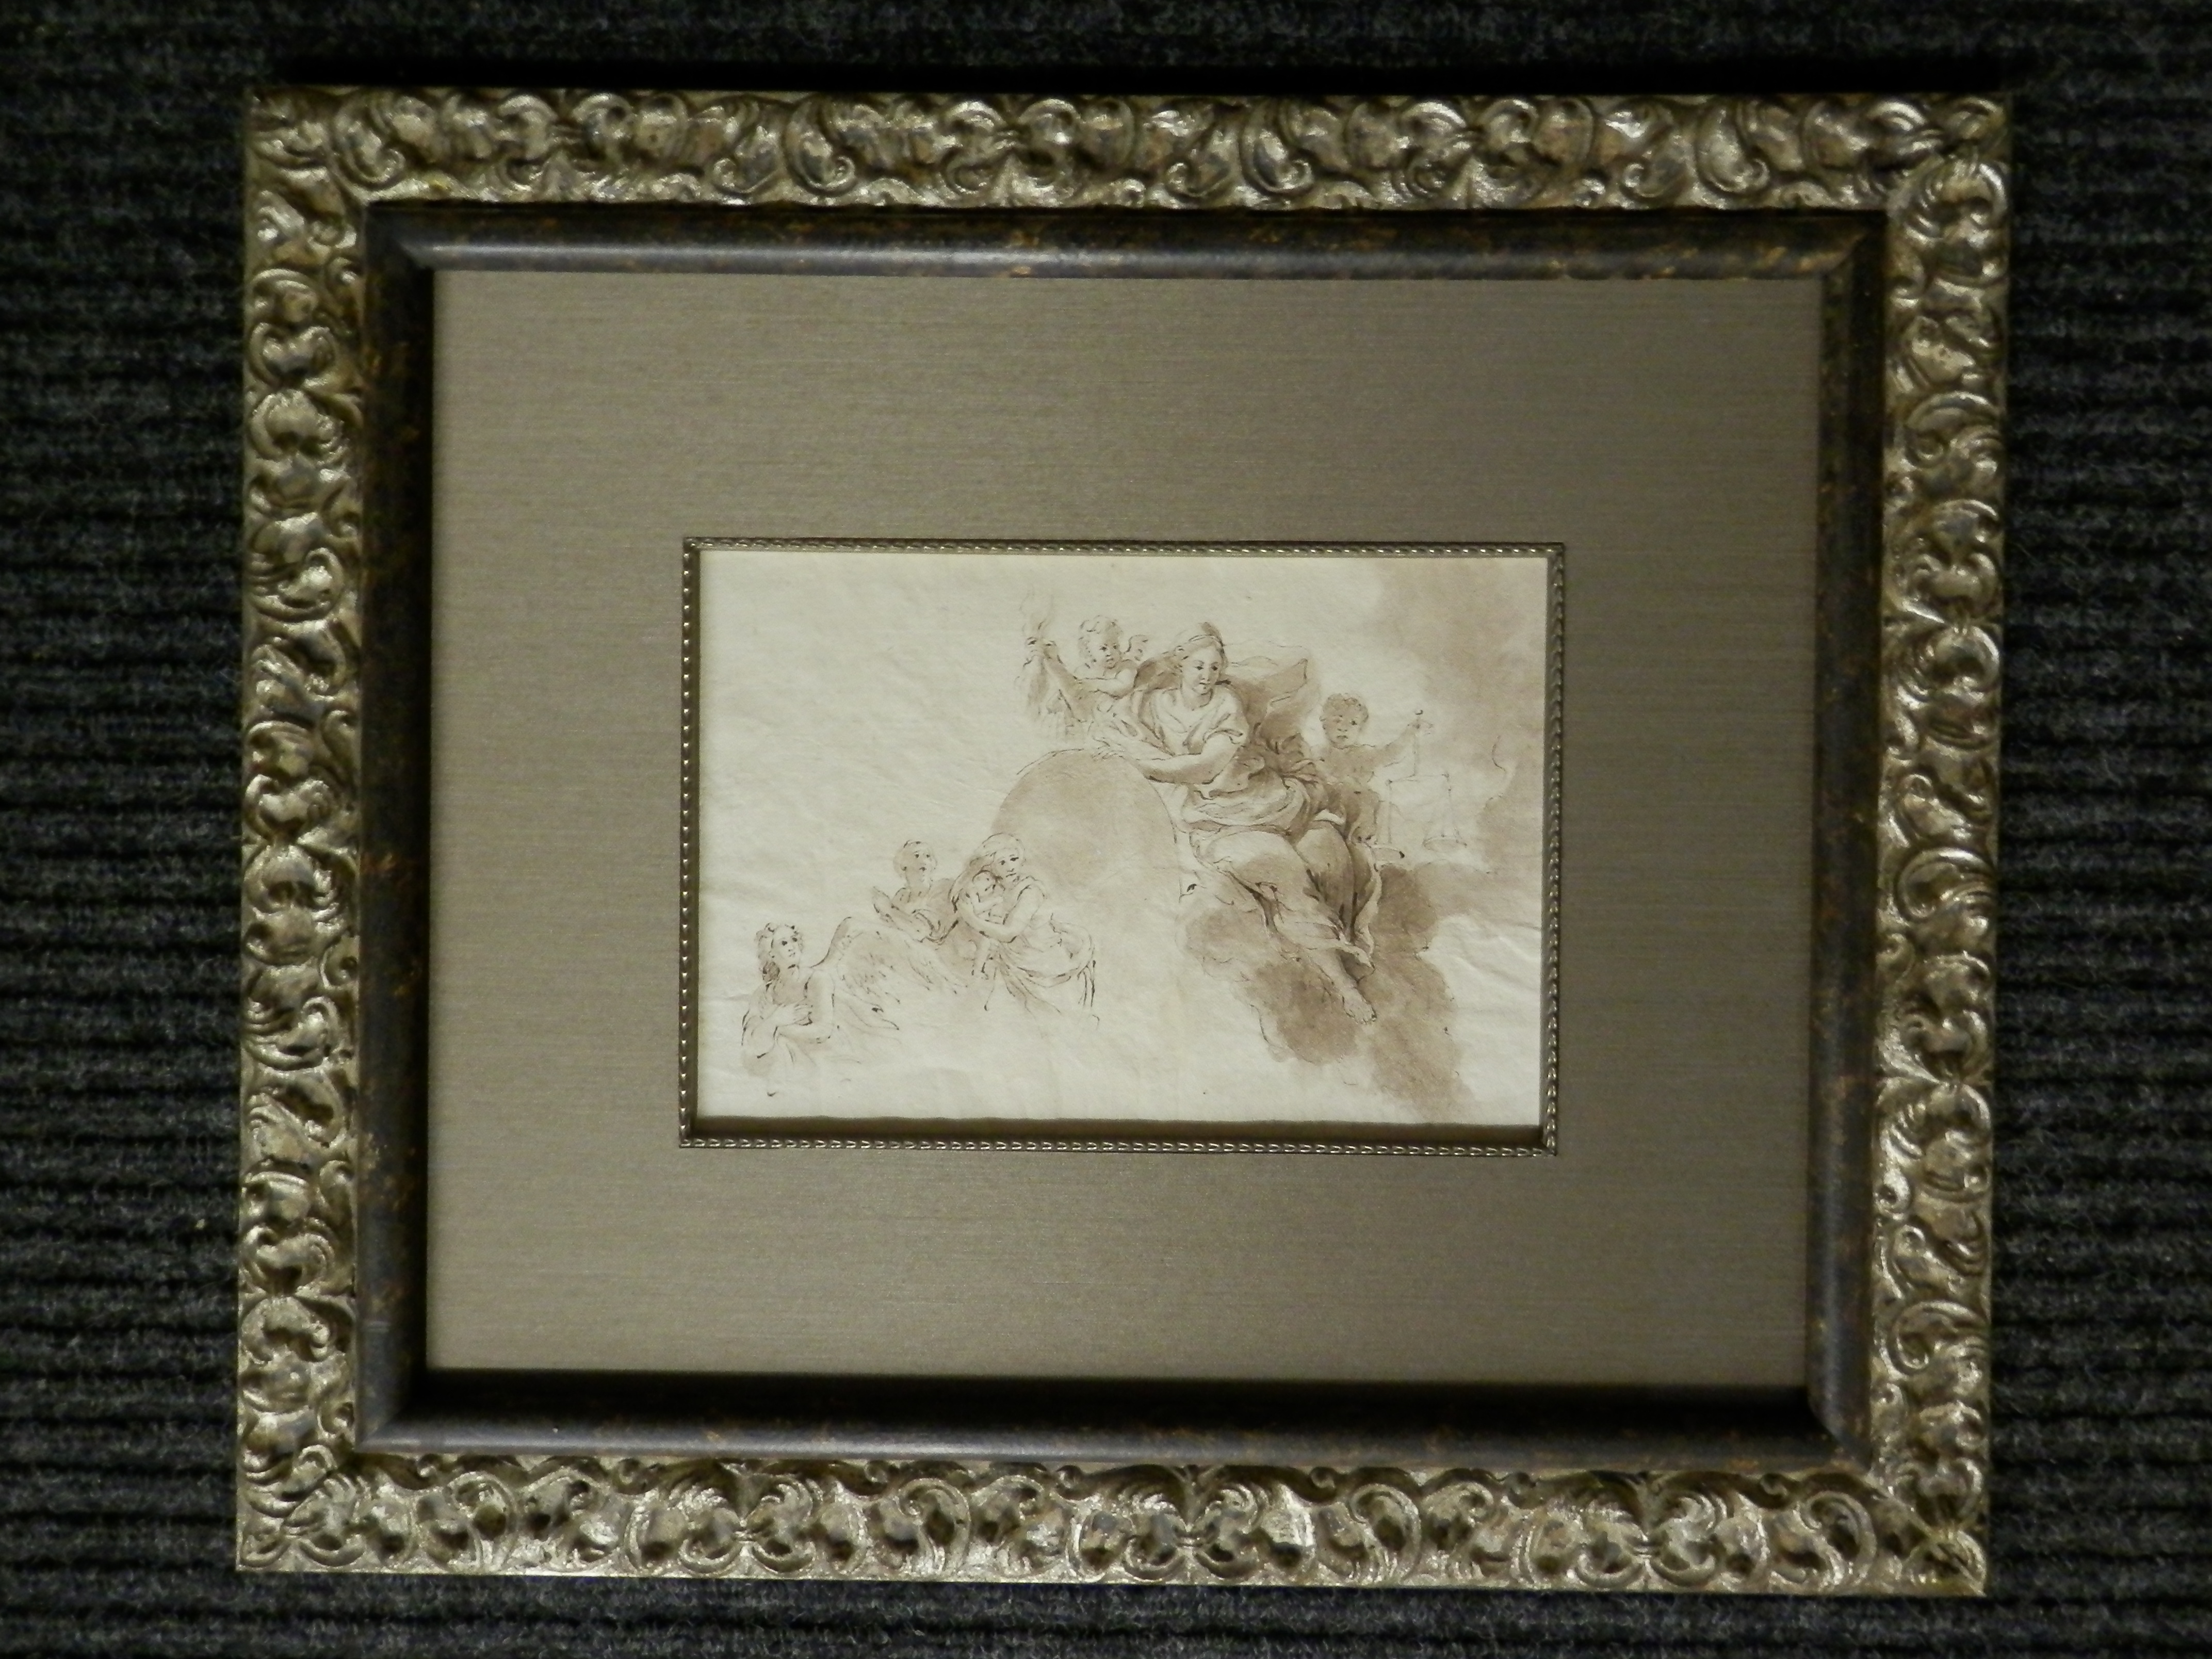 A painting on a frame